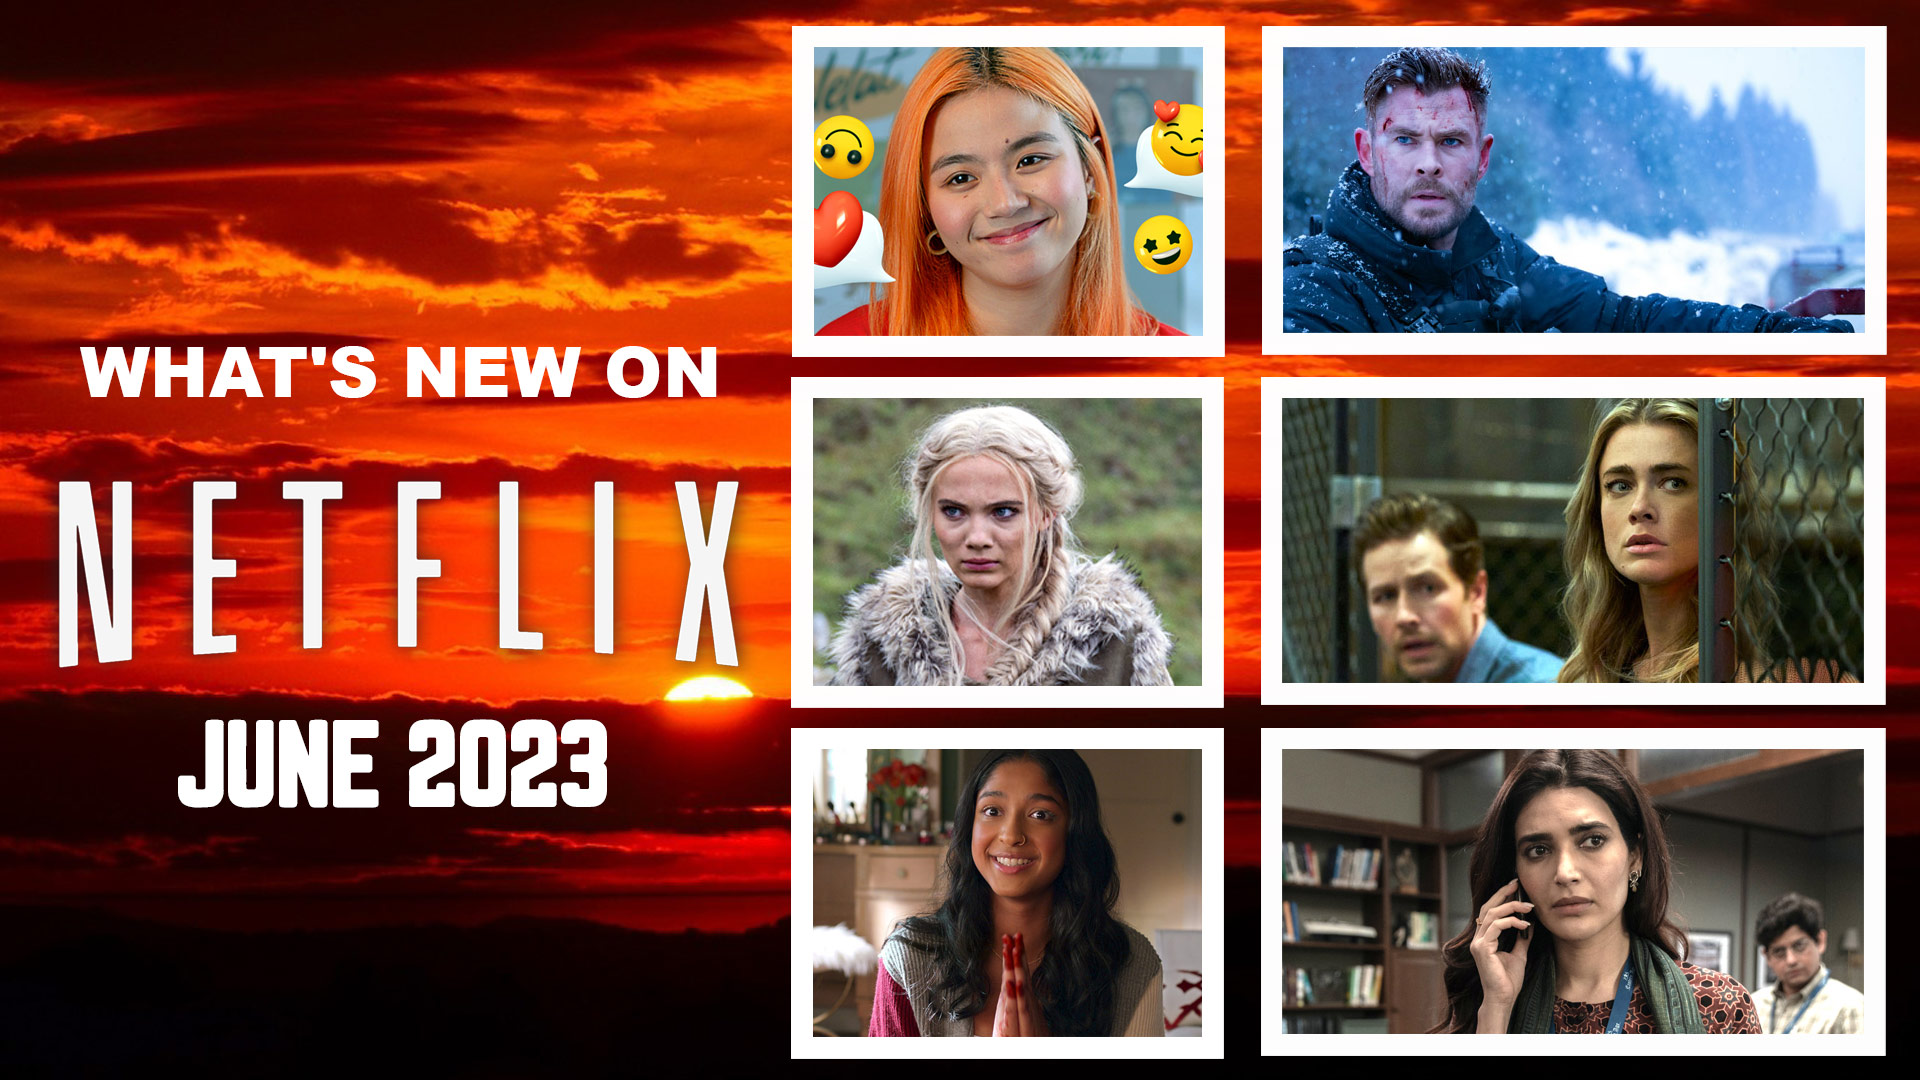 What's New on Netflix June 2023